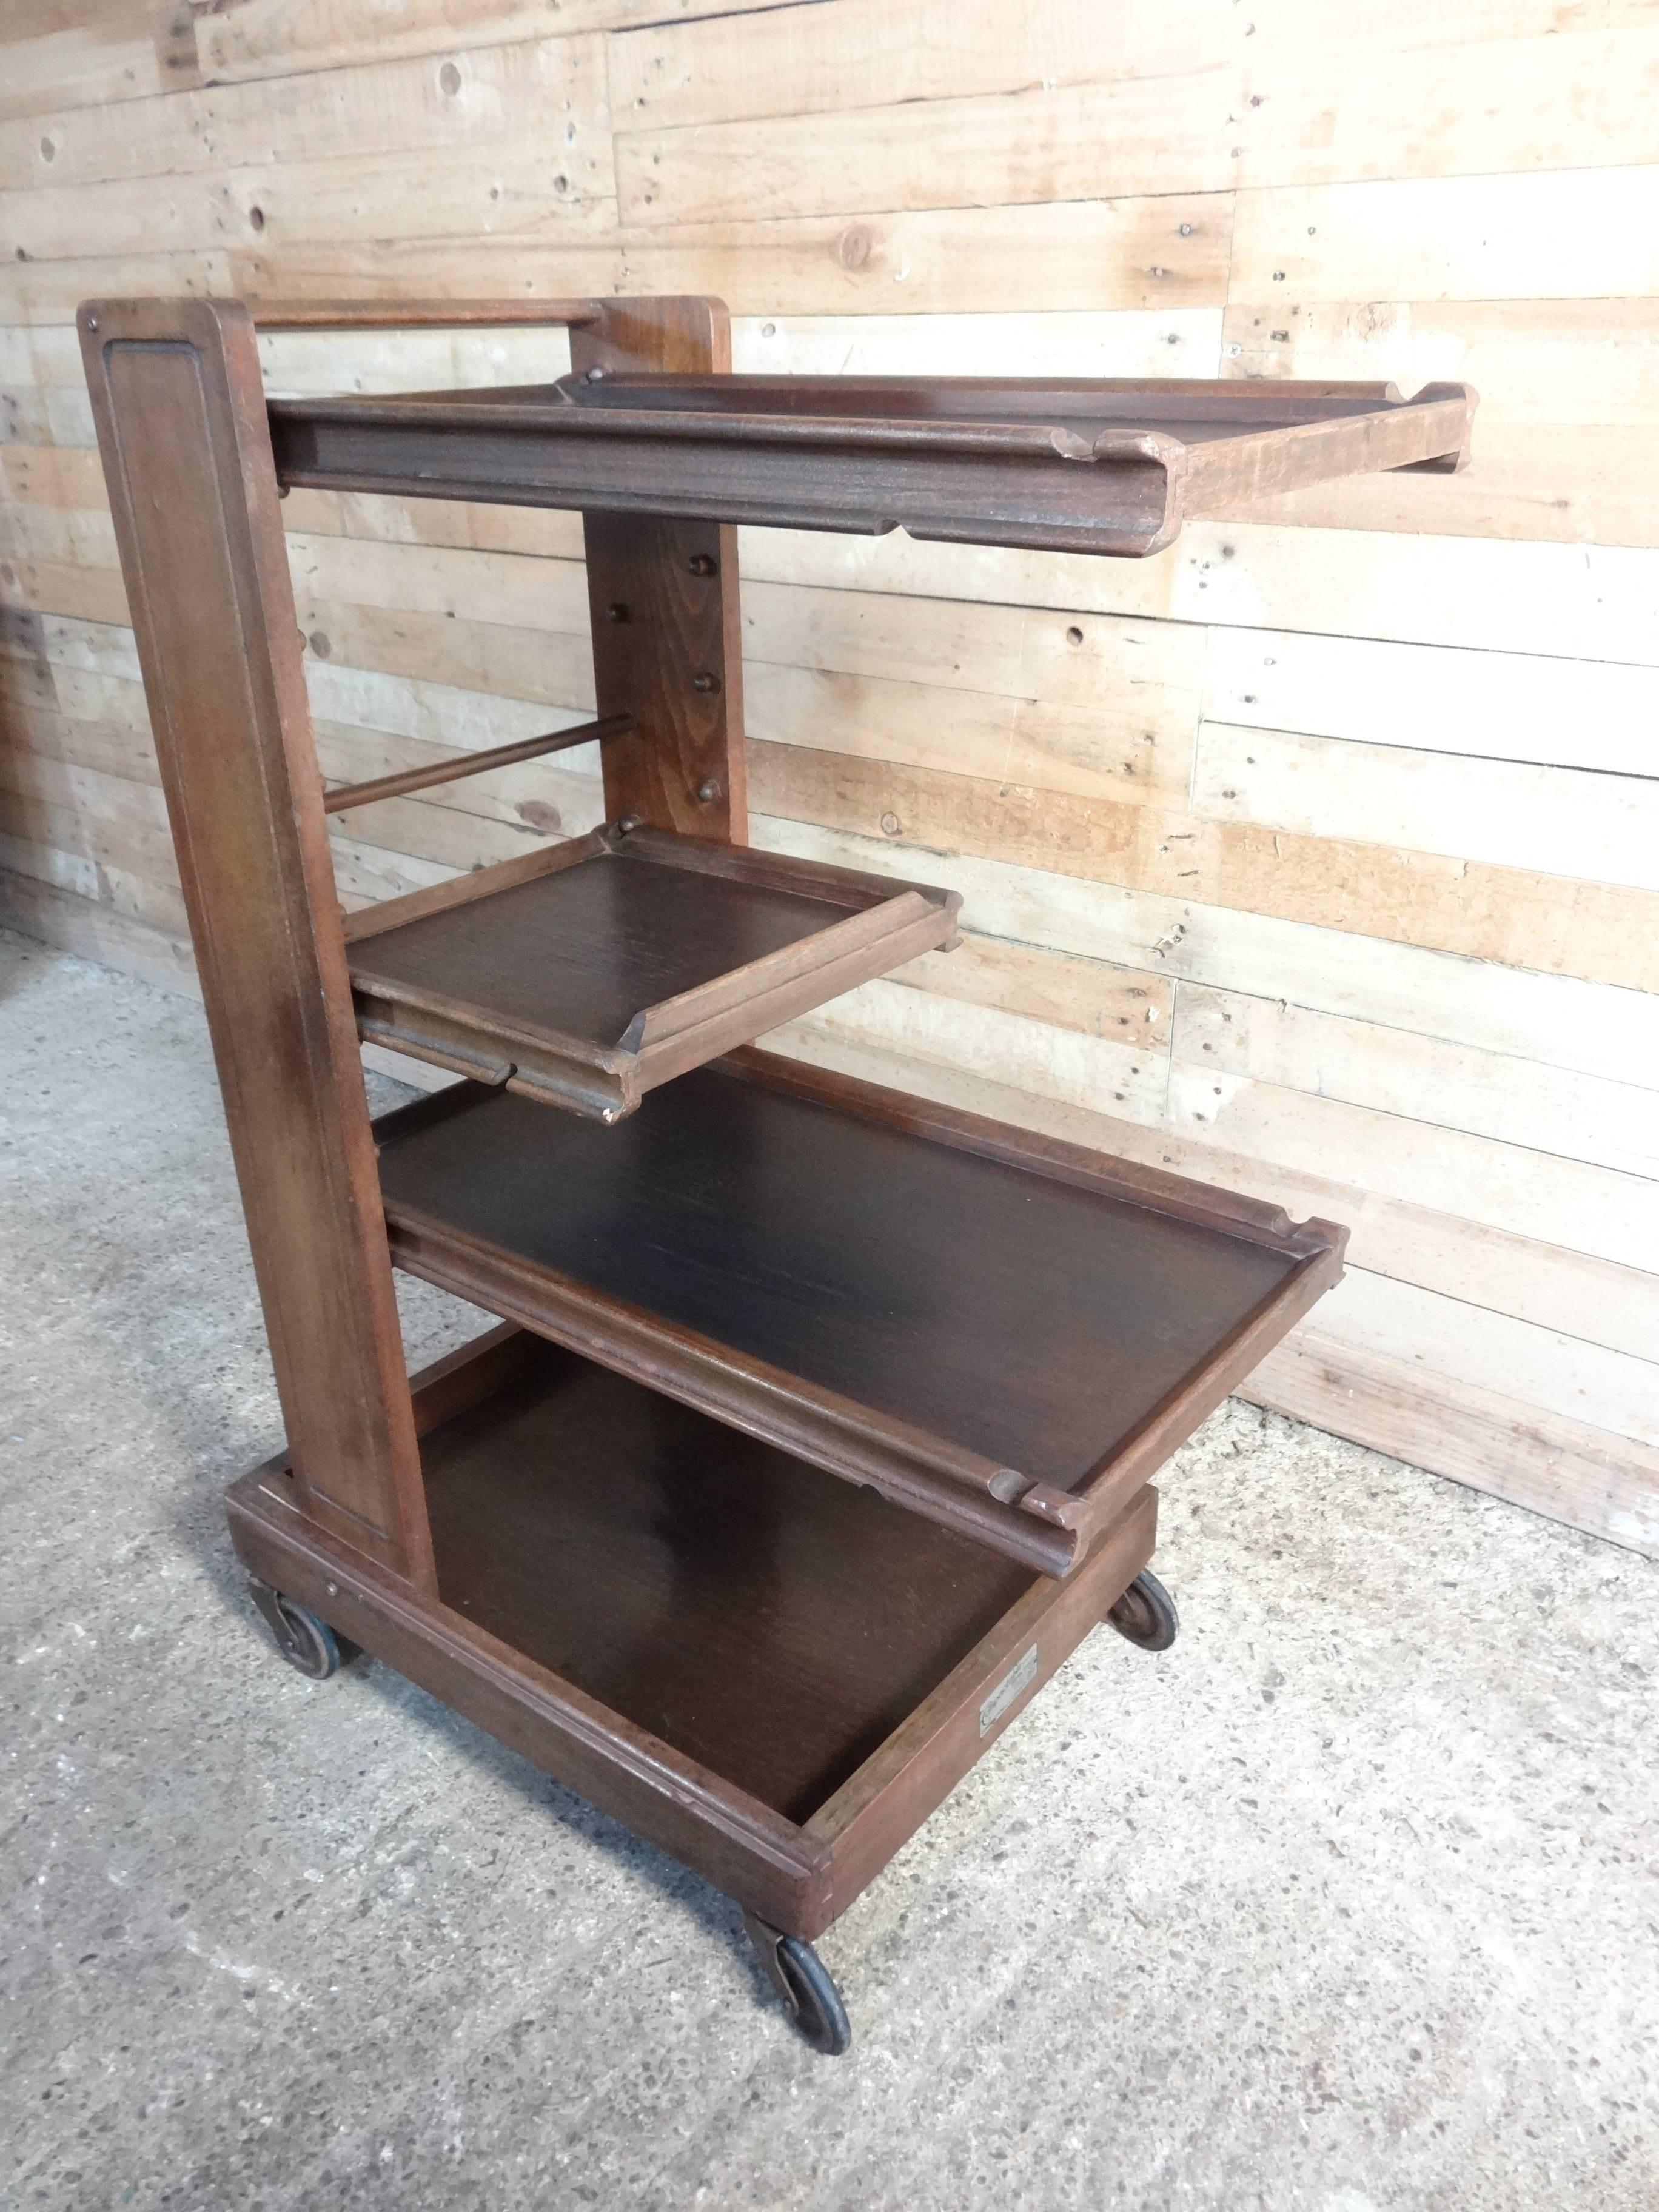 Rare Arts & Craft compactable serving trolley with removable trays, can be positioned at any height, it stands on metal wheels.

Made by Compactom ltd London.